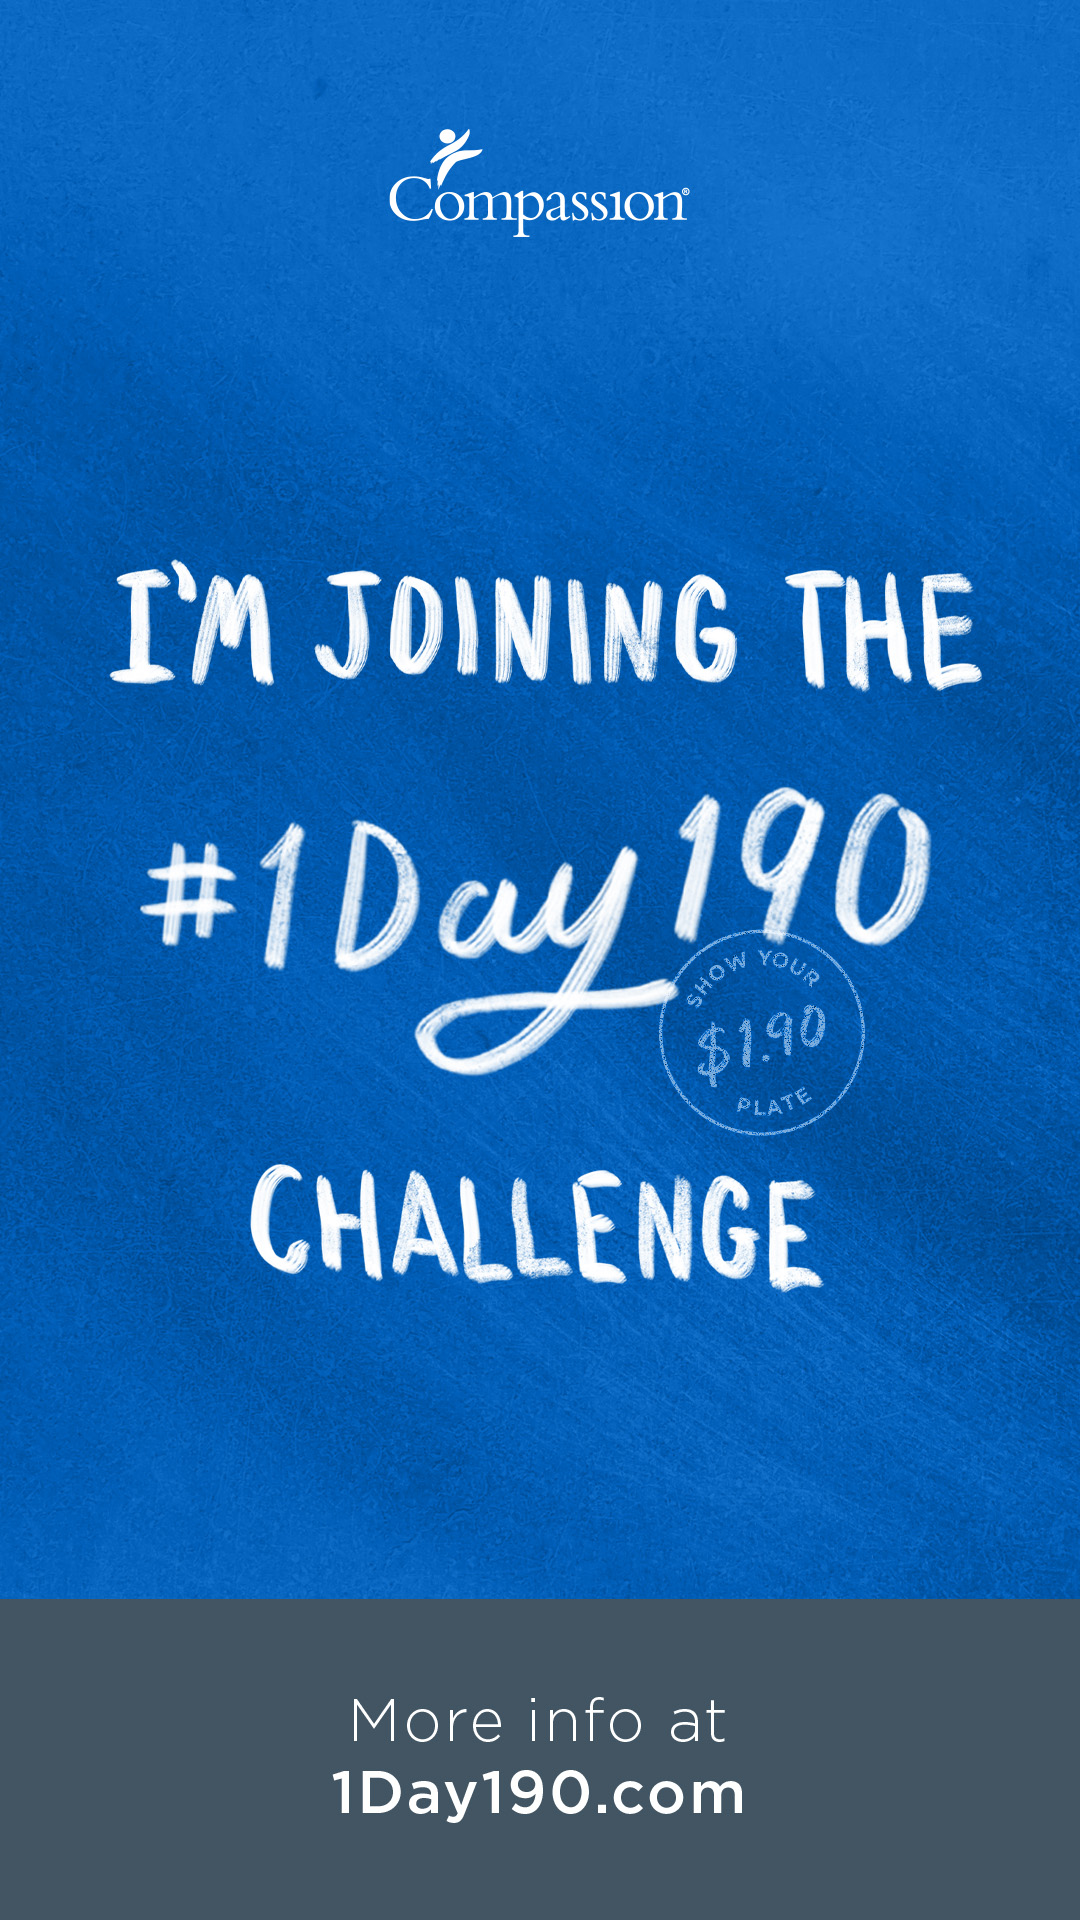 I am joining 1day190